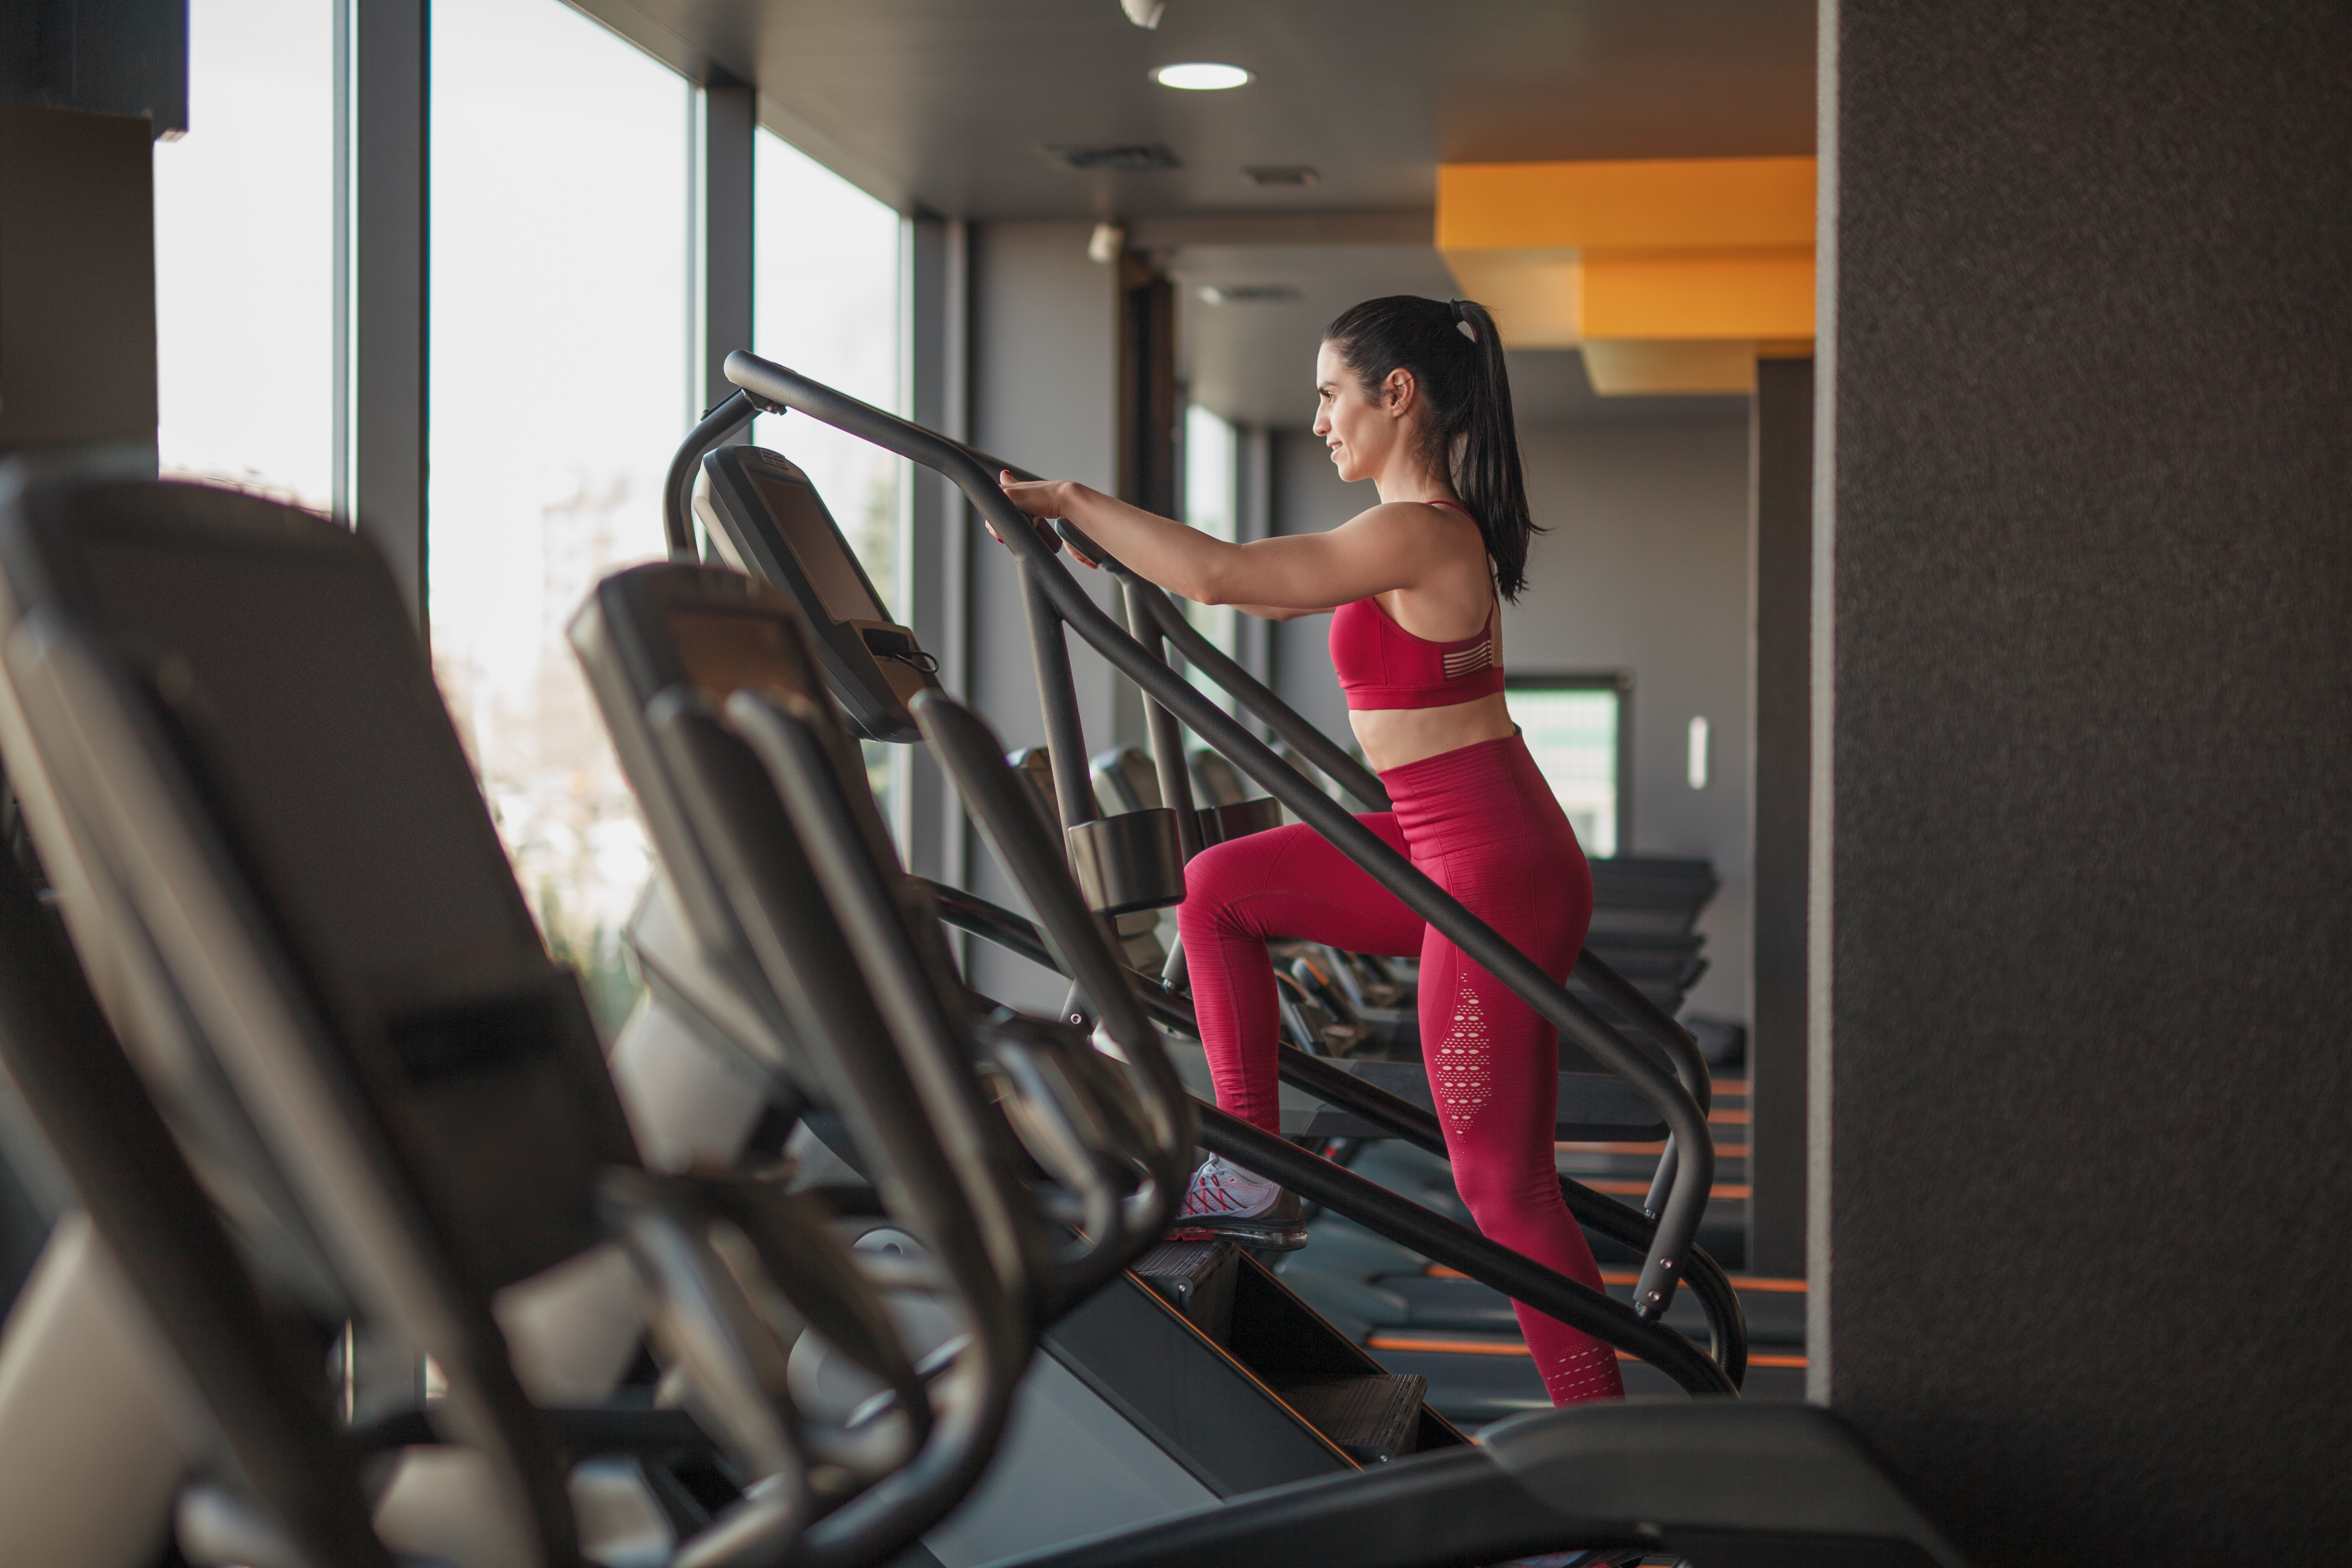 The remarkable benefits of stair climber workouts